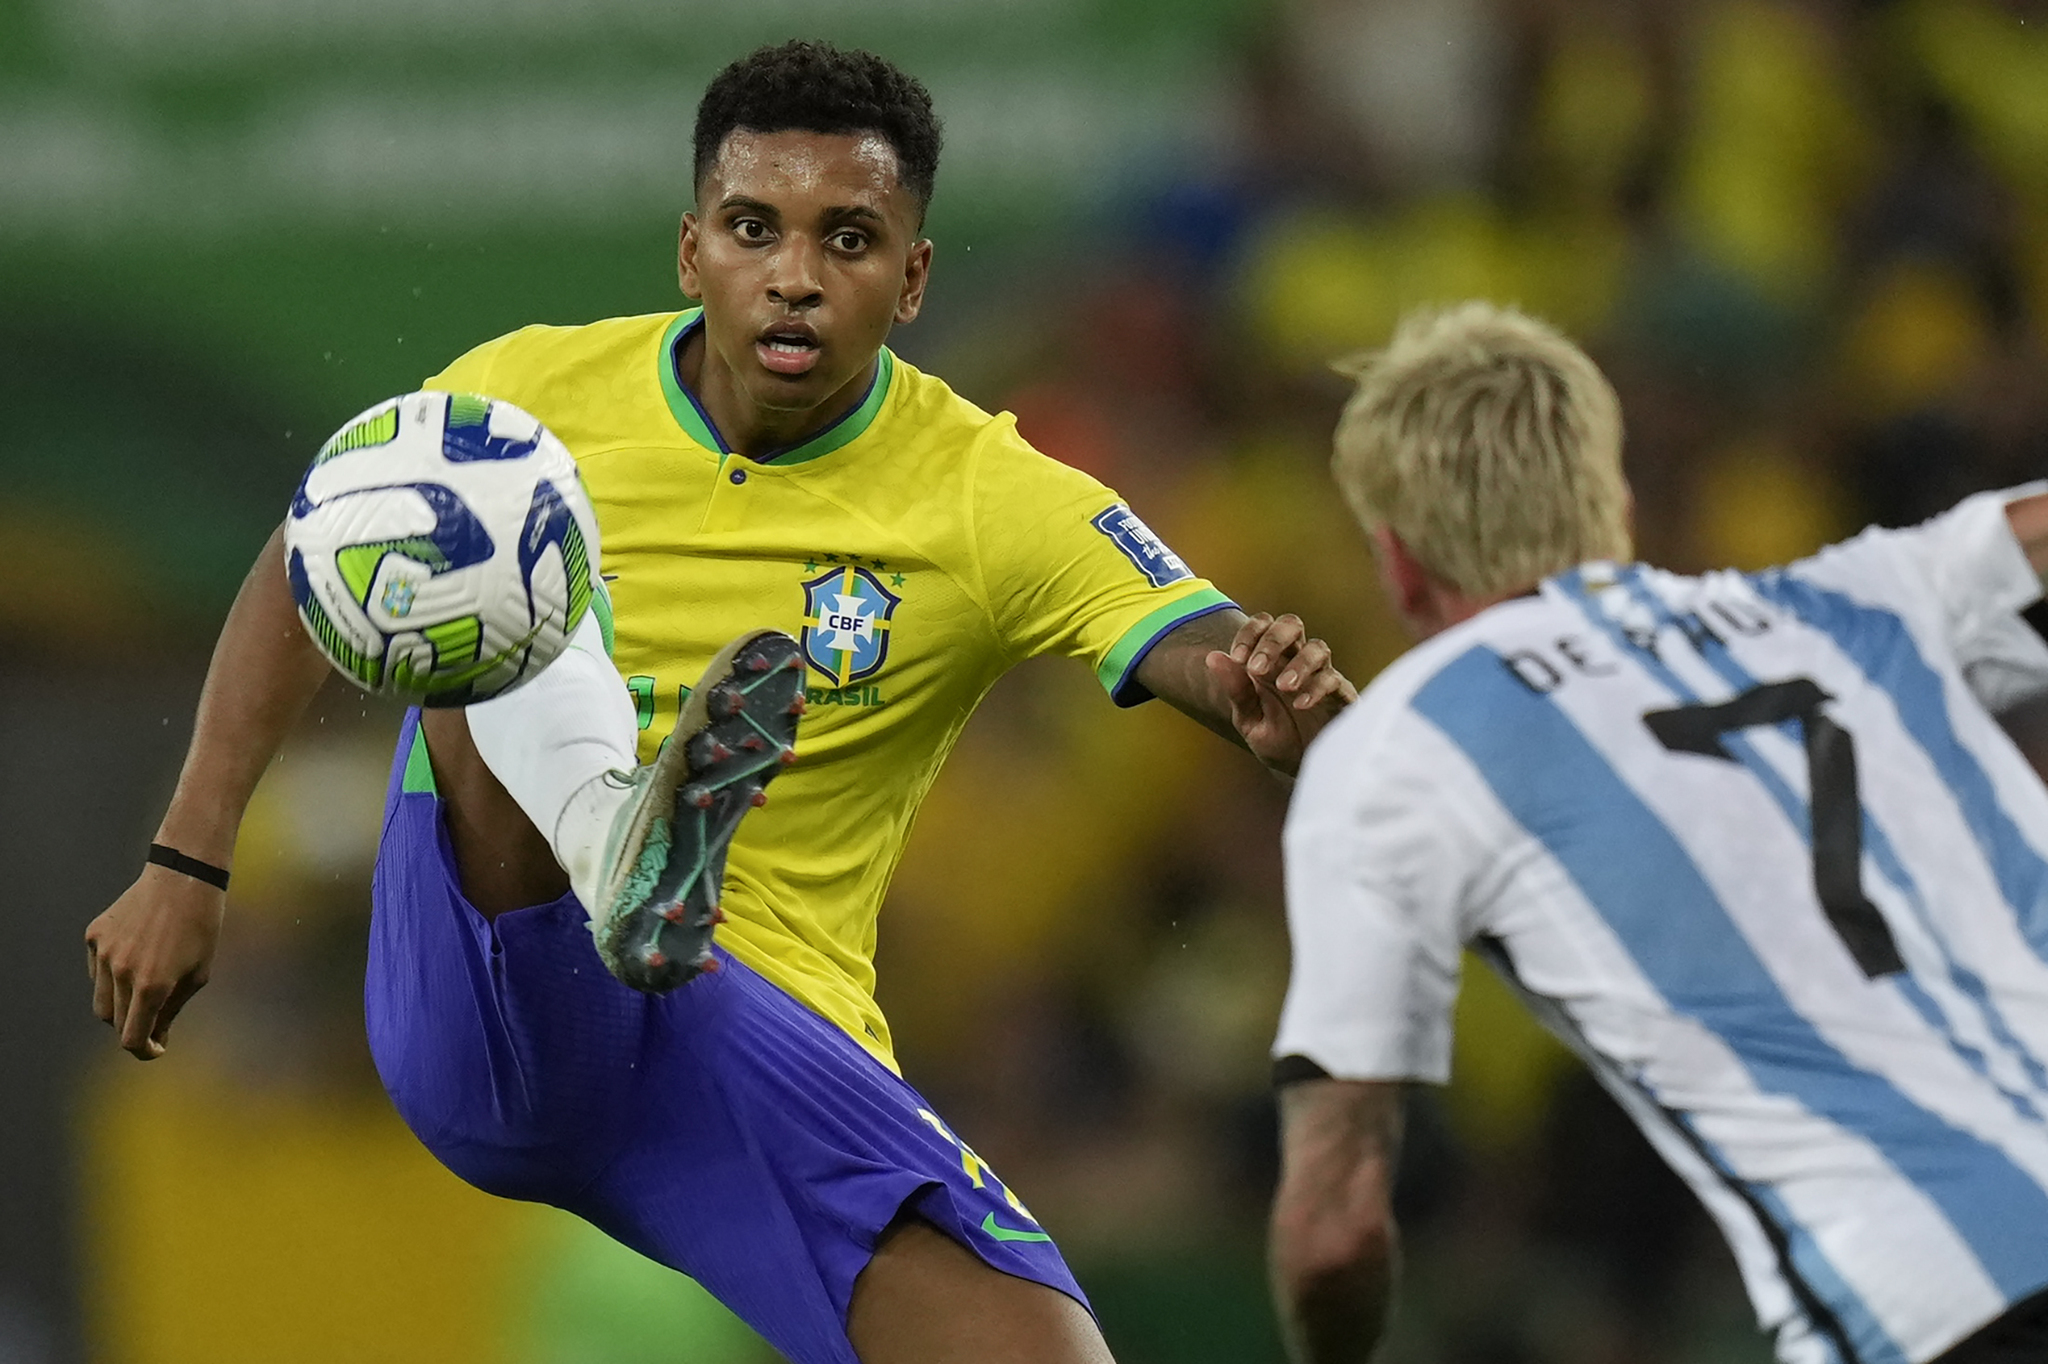 Brazil National Football Team: Most Up-to-Date Encyclopedia, News